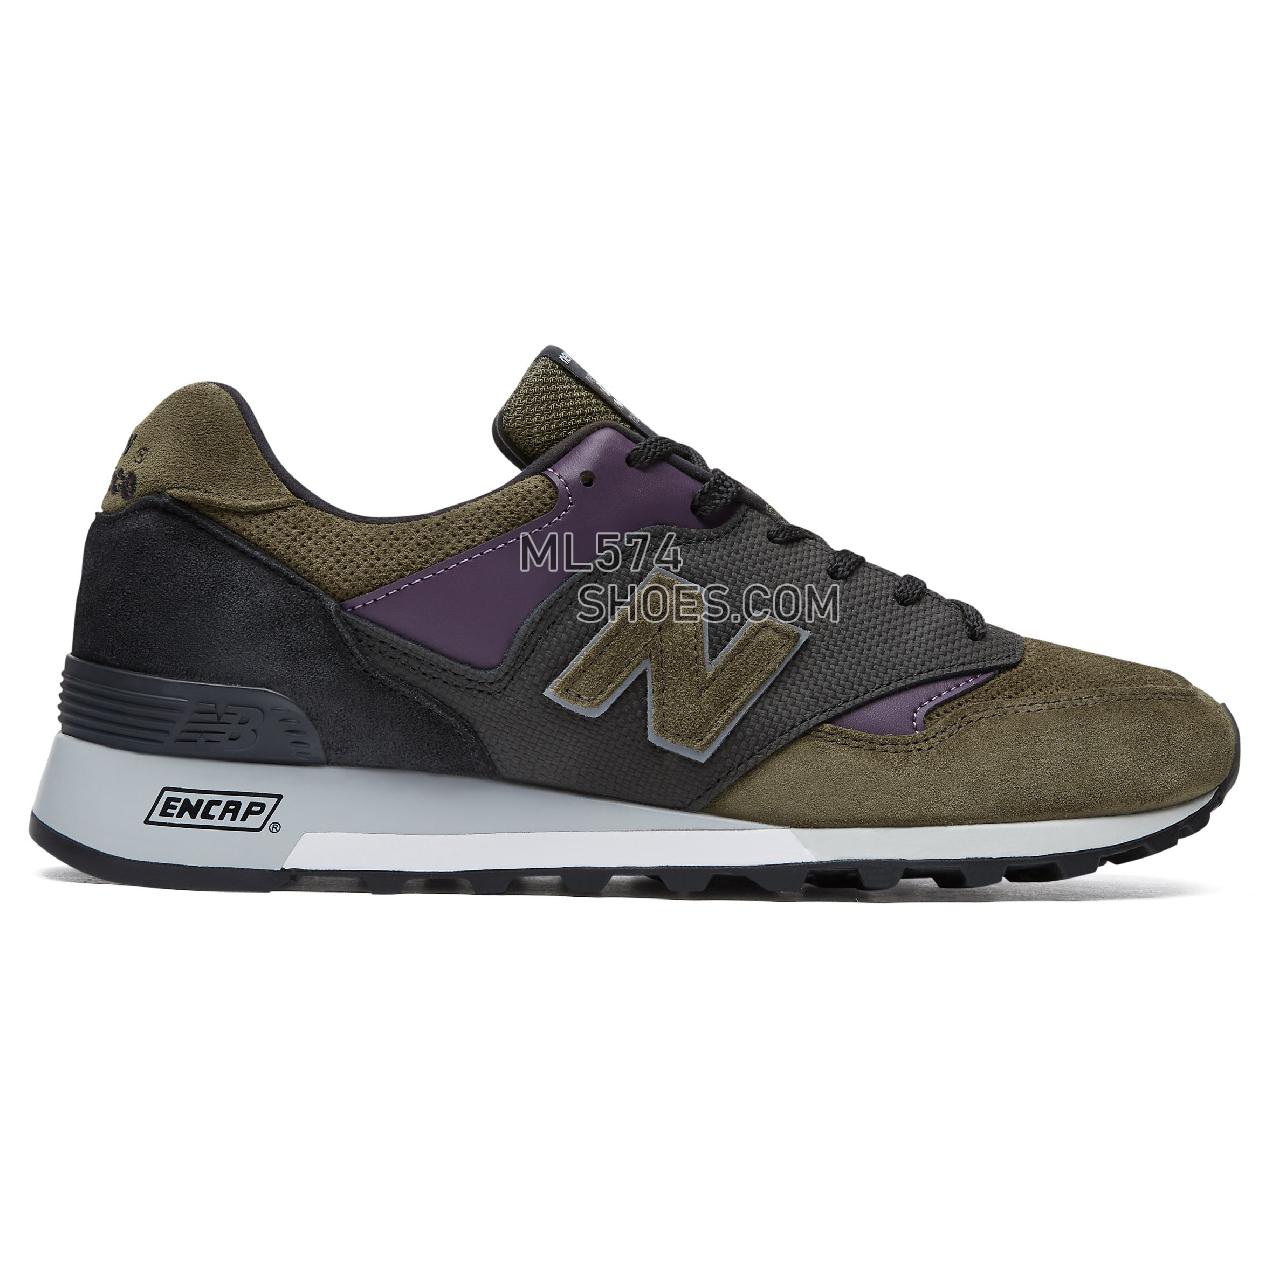 New Balance Made in UK 577 - Men's Made in UK 577 Classic ML577V1-27415-M - Green with Purple and Black - M577GPK